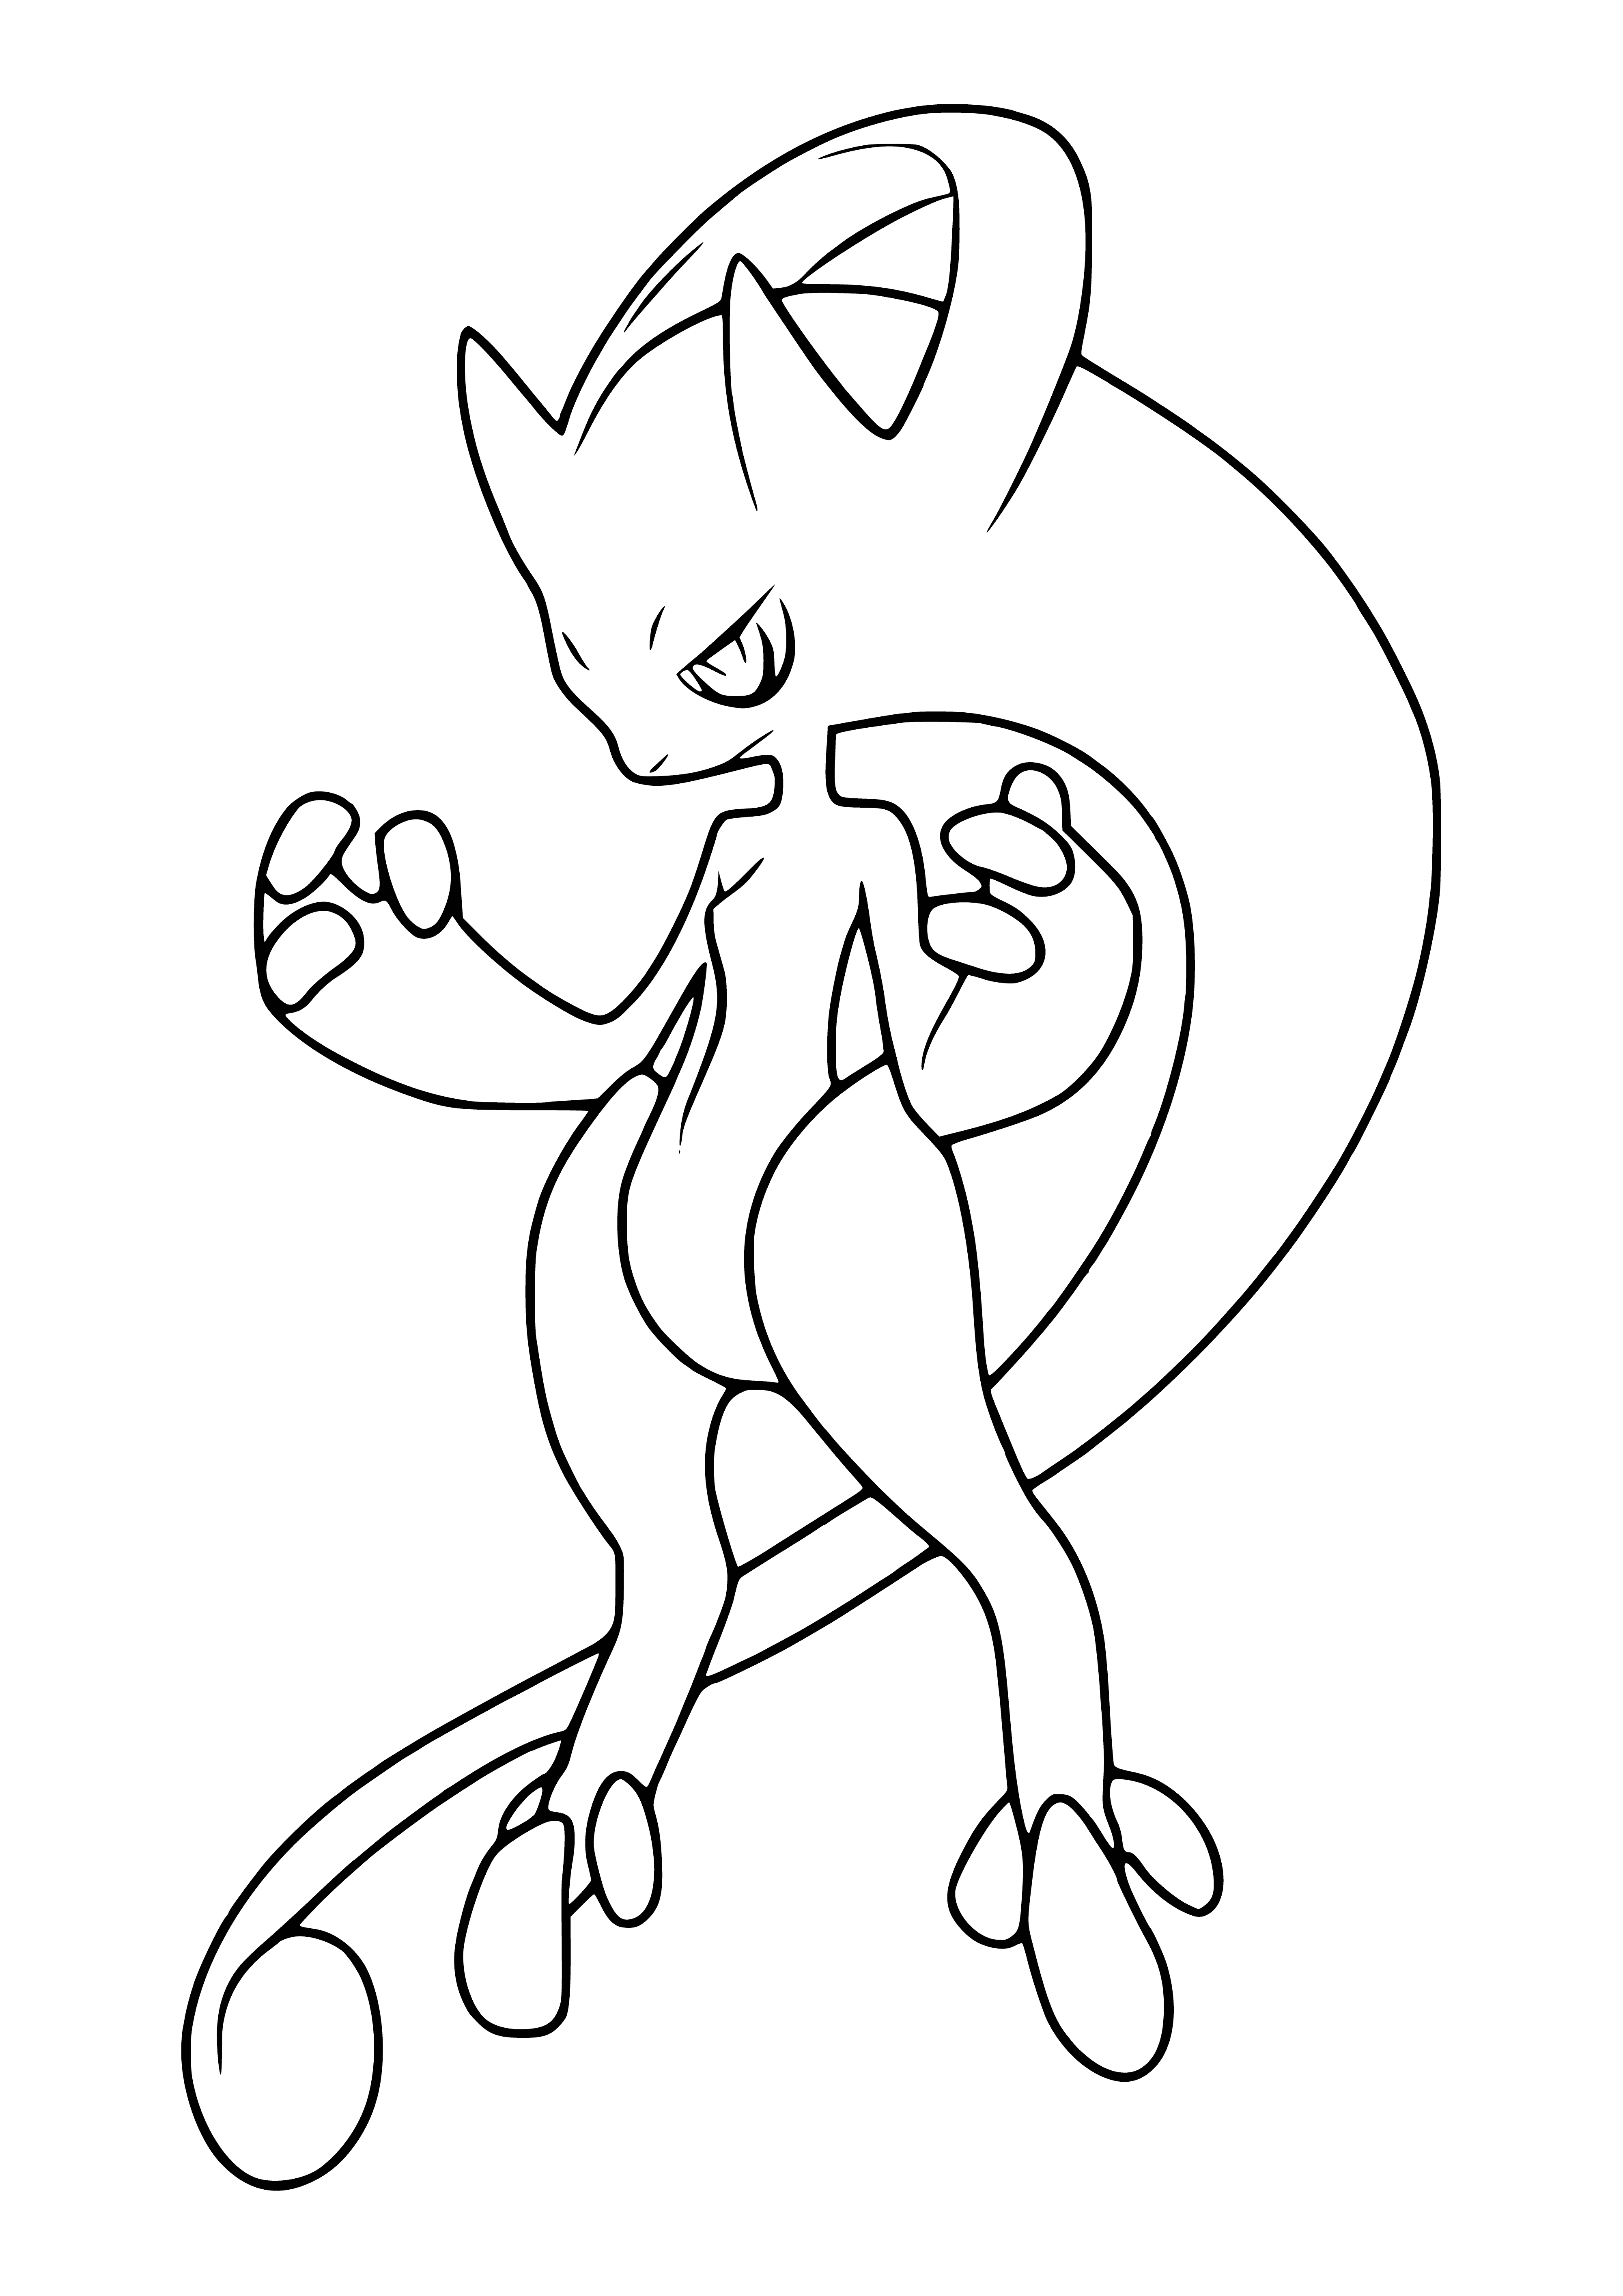 coloring page: Mega Mewtwo X is a large, blue Pokemon with red eyes and a black "X" mark on its back. Powerful and muscular, it claws and has three toes on each hind paw.